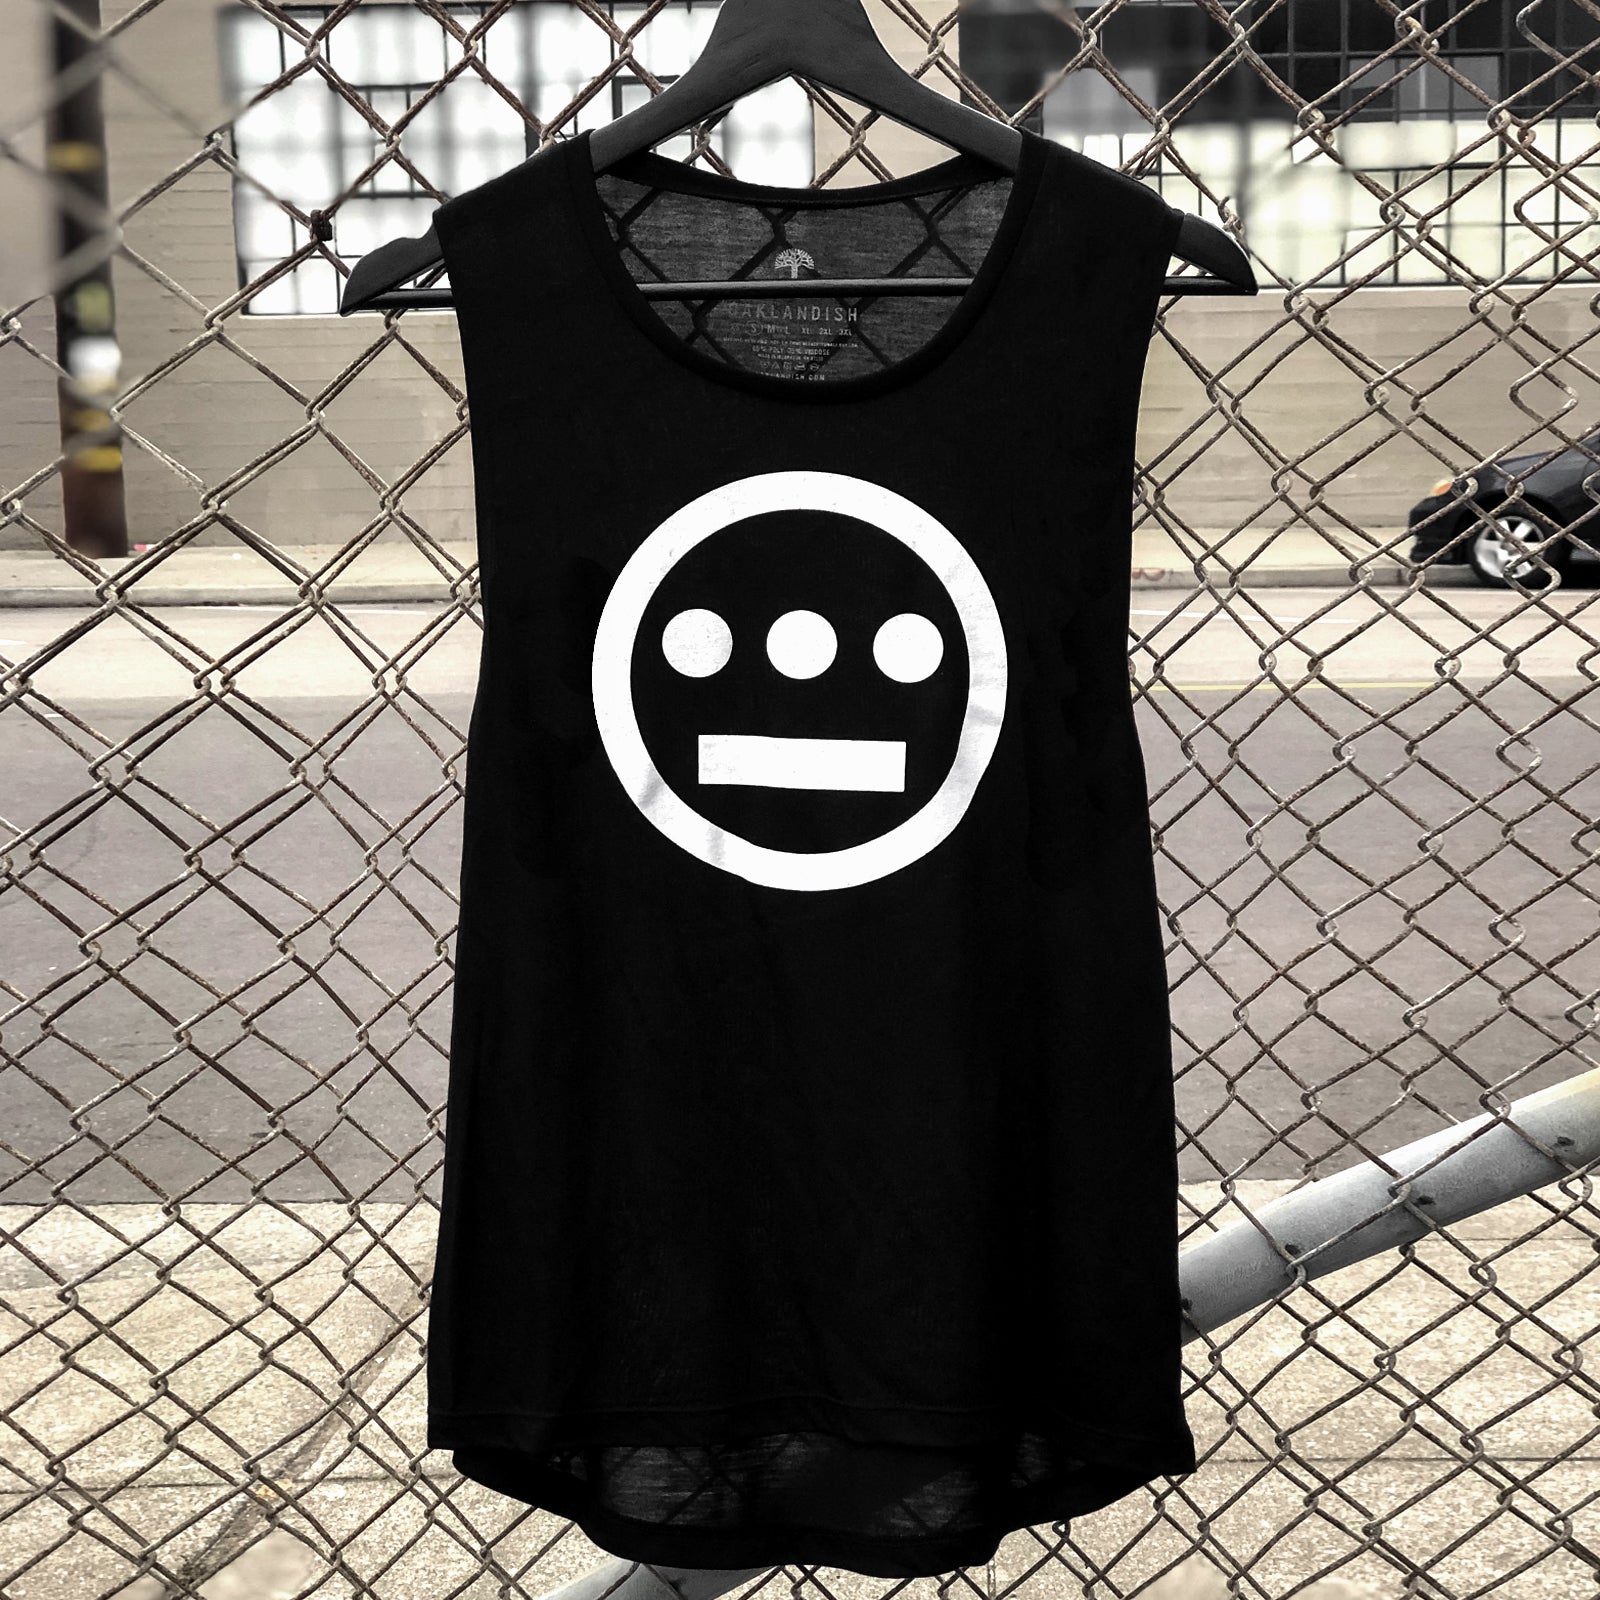 Women's black tank top with white Hiero Hip Hop Crew Classic Logo on chest hanging outdoors on a chain-link fence.